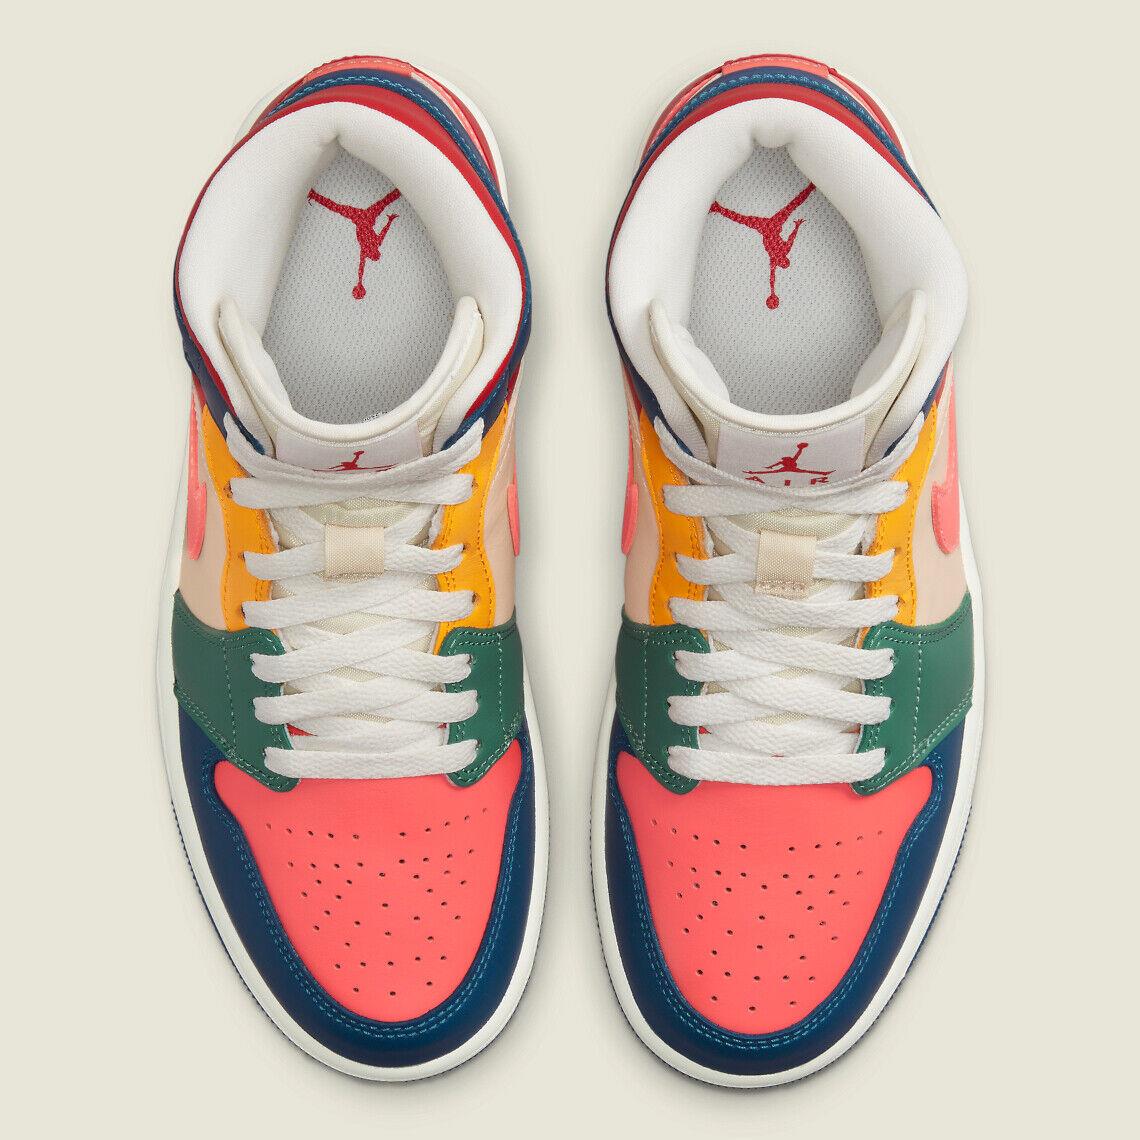 Nike shoes Air - Multicolor 2